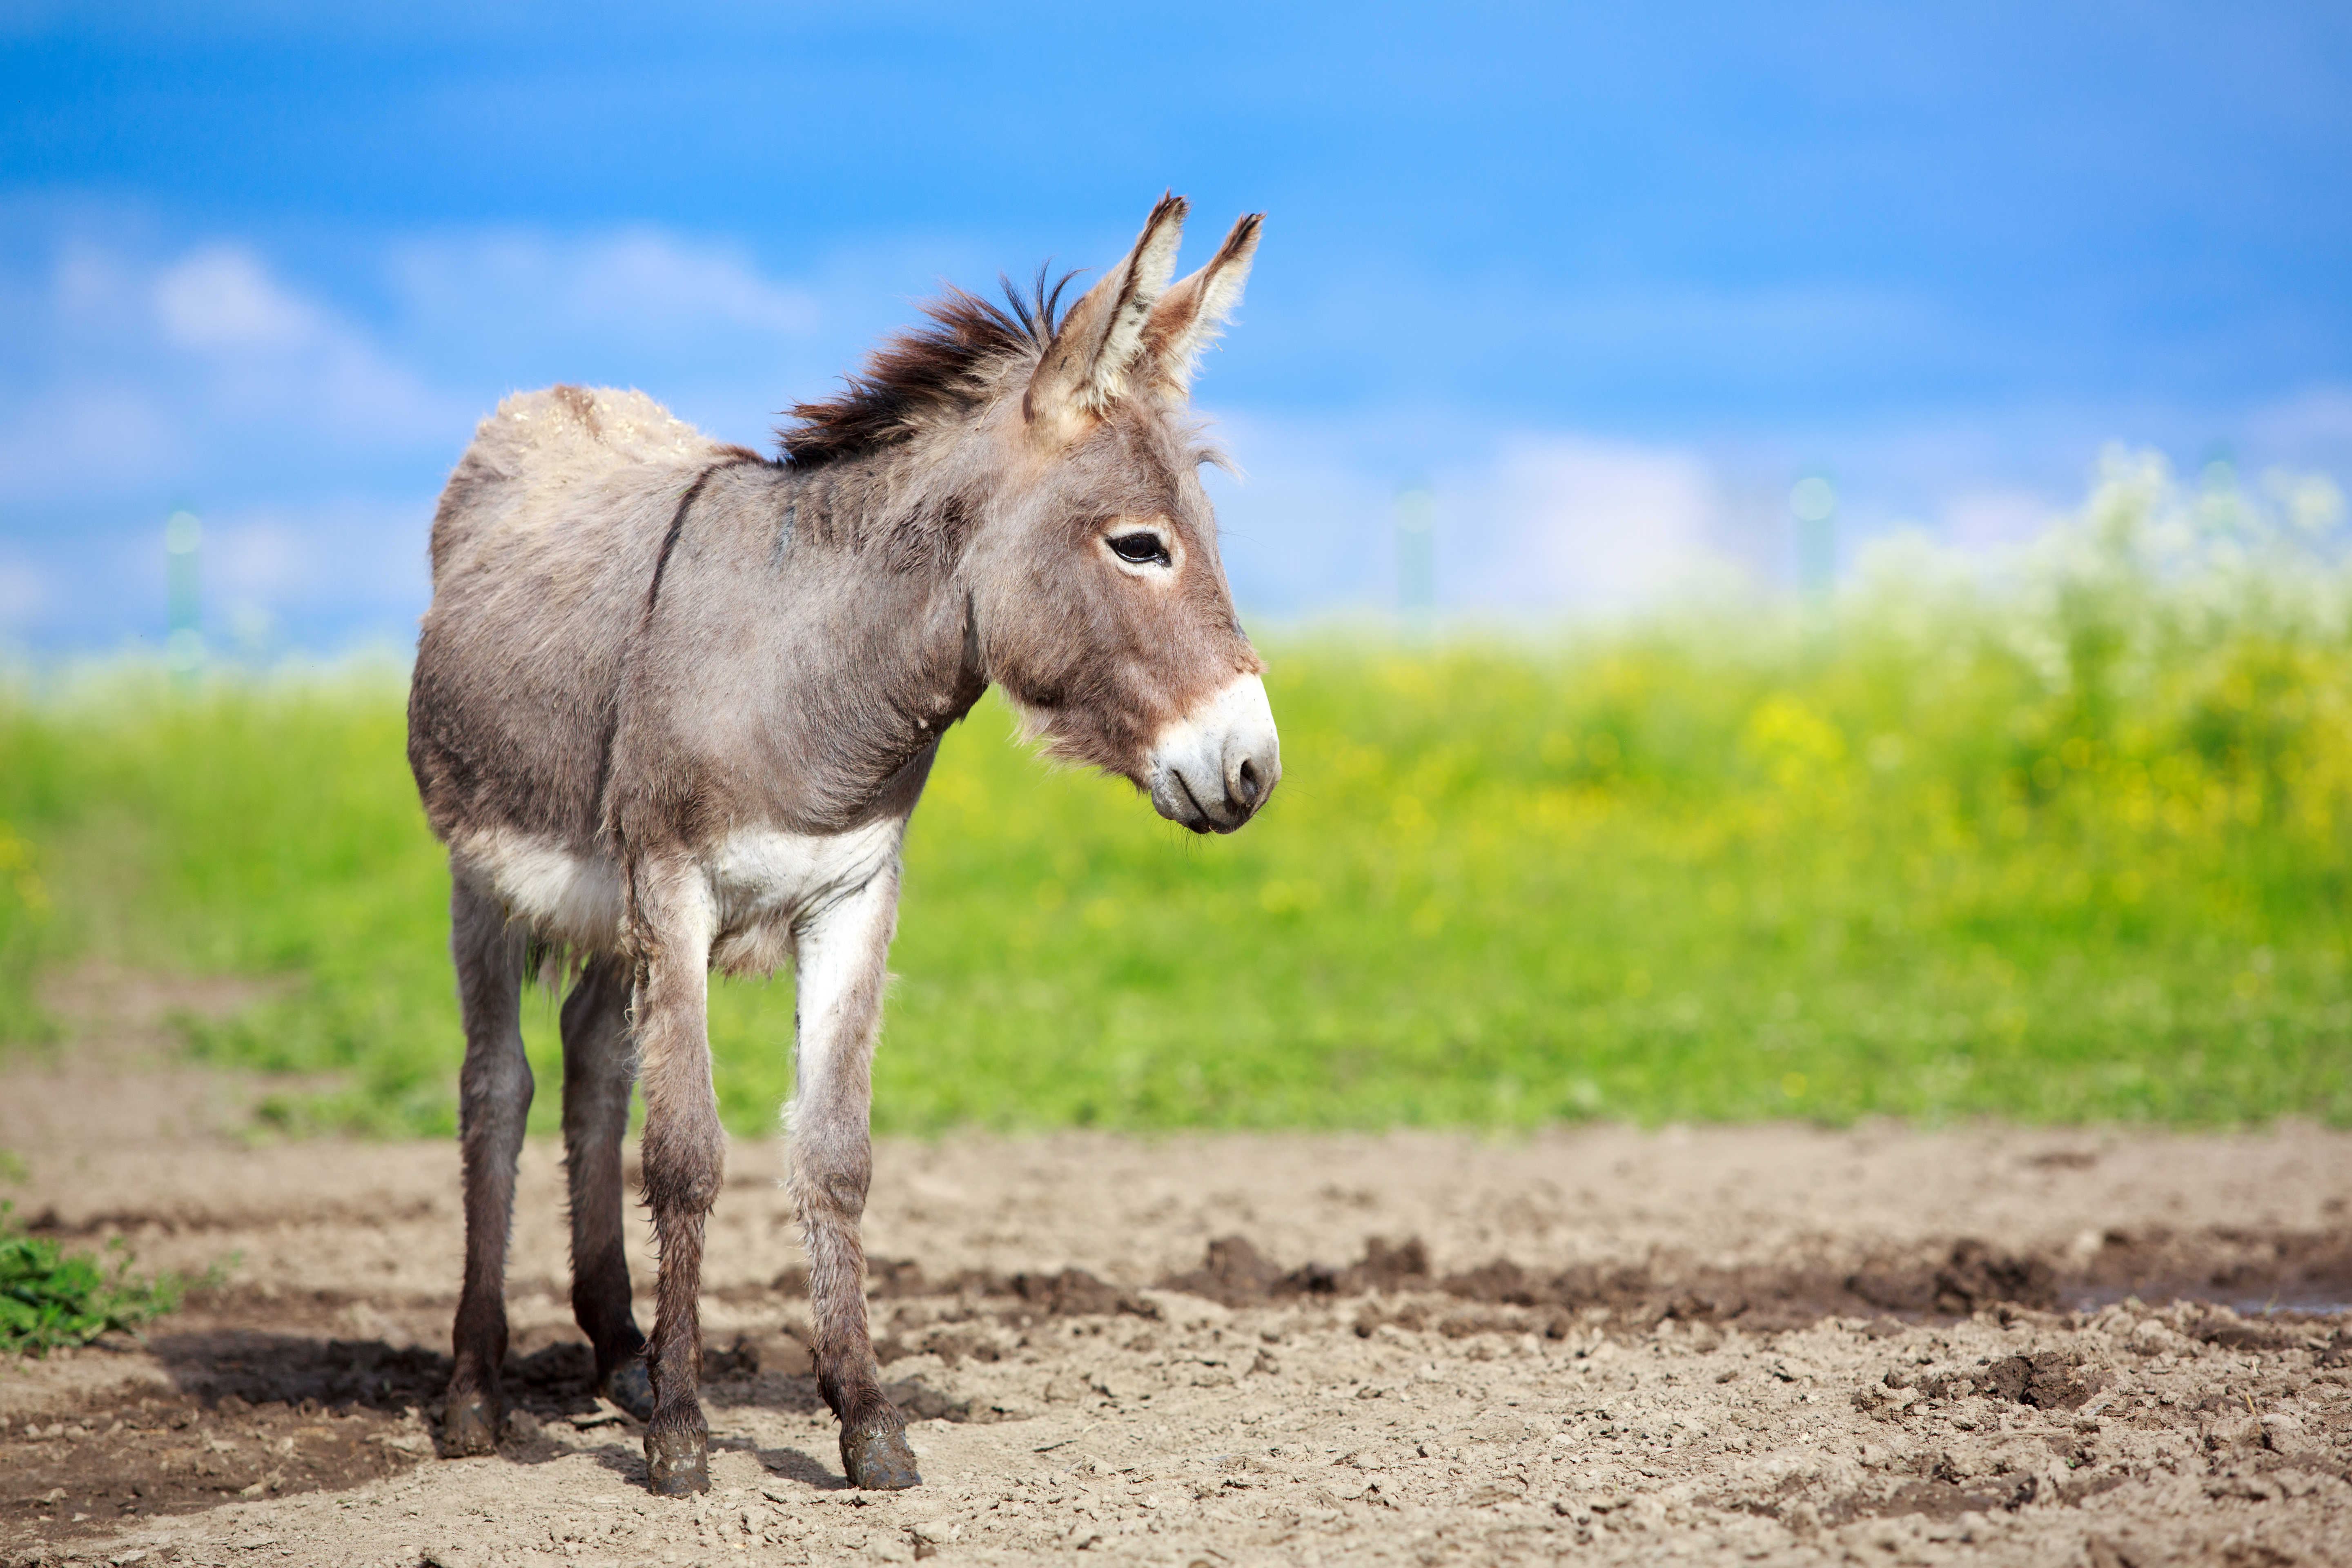 Picture of a donkey in a field. Copywriter Fiona Thompson writes fundraising materials for charities including the Brooke, the animal welfare charity